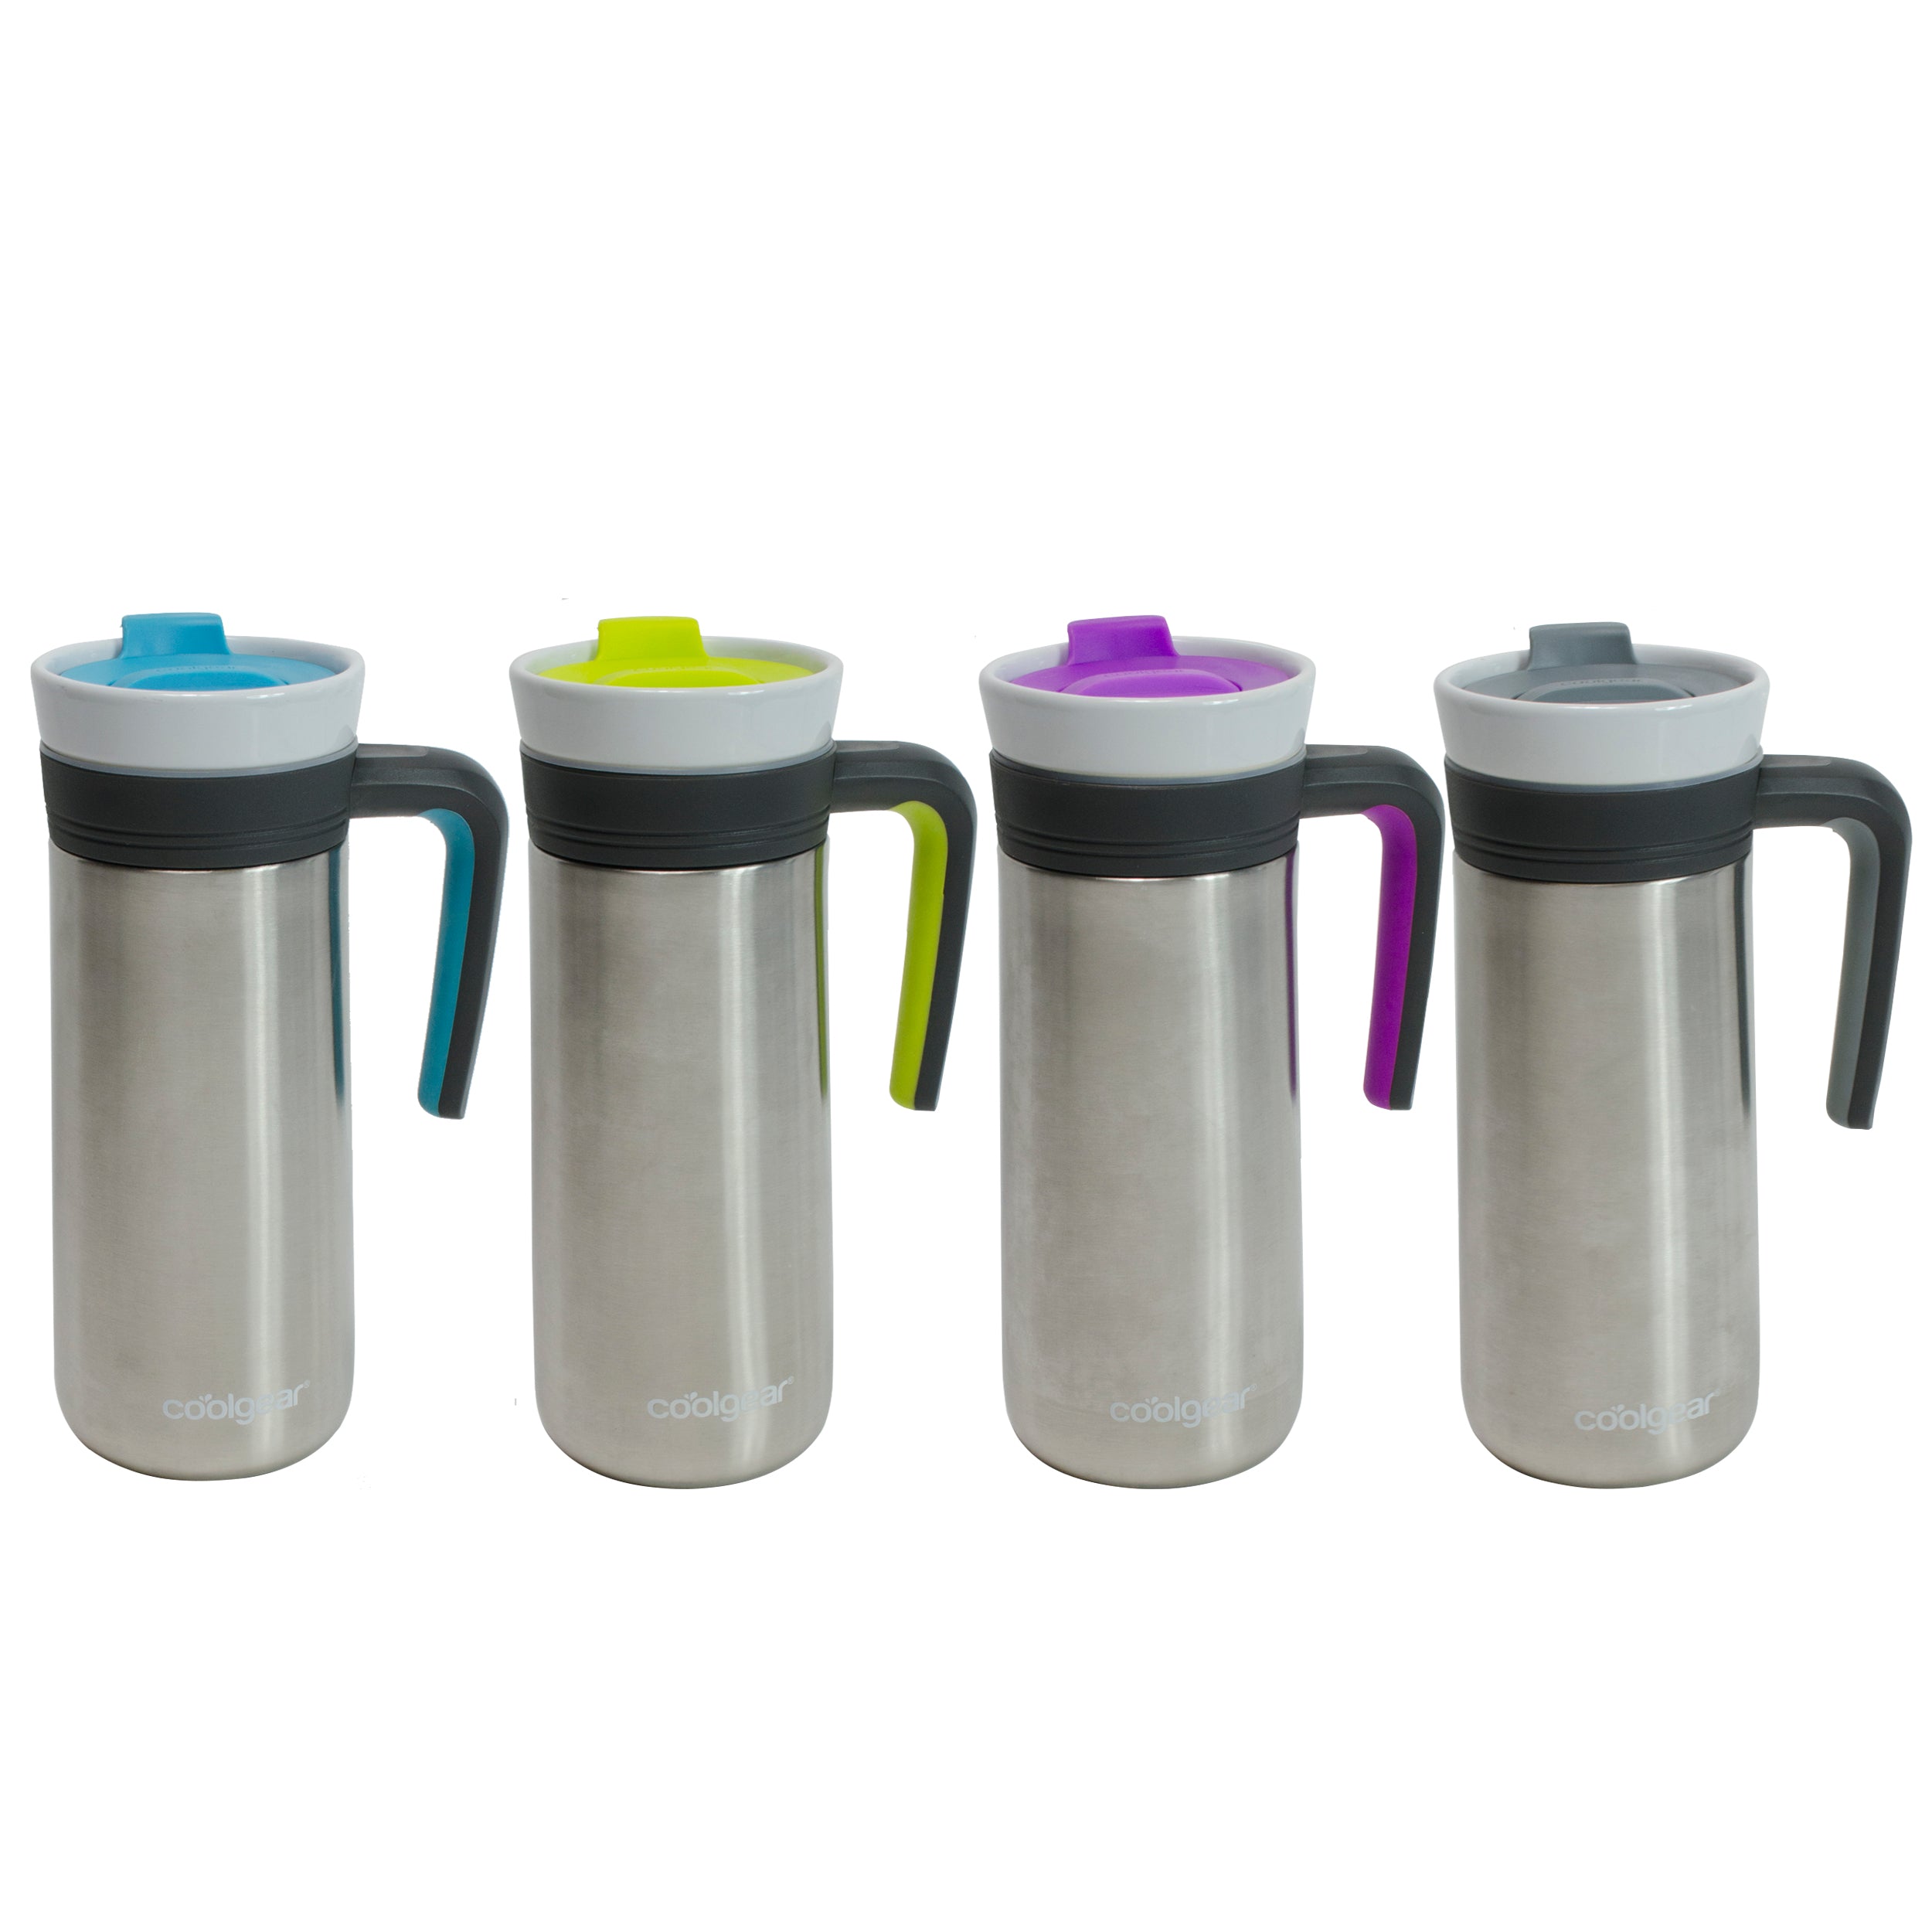 COOL GEAR 4-Pack 12 oz Stainless Steel Kona Triple Insulated Travel Mug with Handle | Dishwasher Safe & Great For Coffee, Tea, Matcha and Keeping Drinks Hot